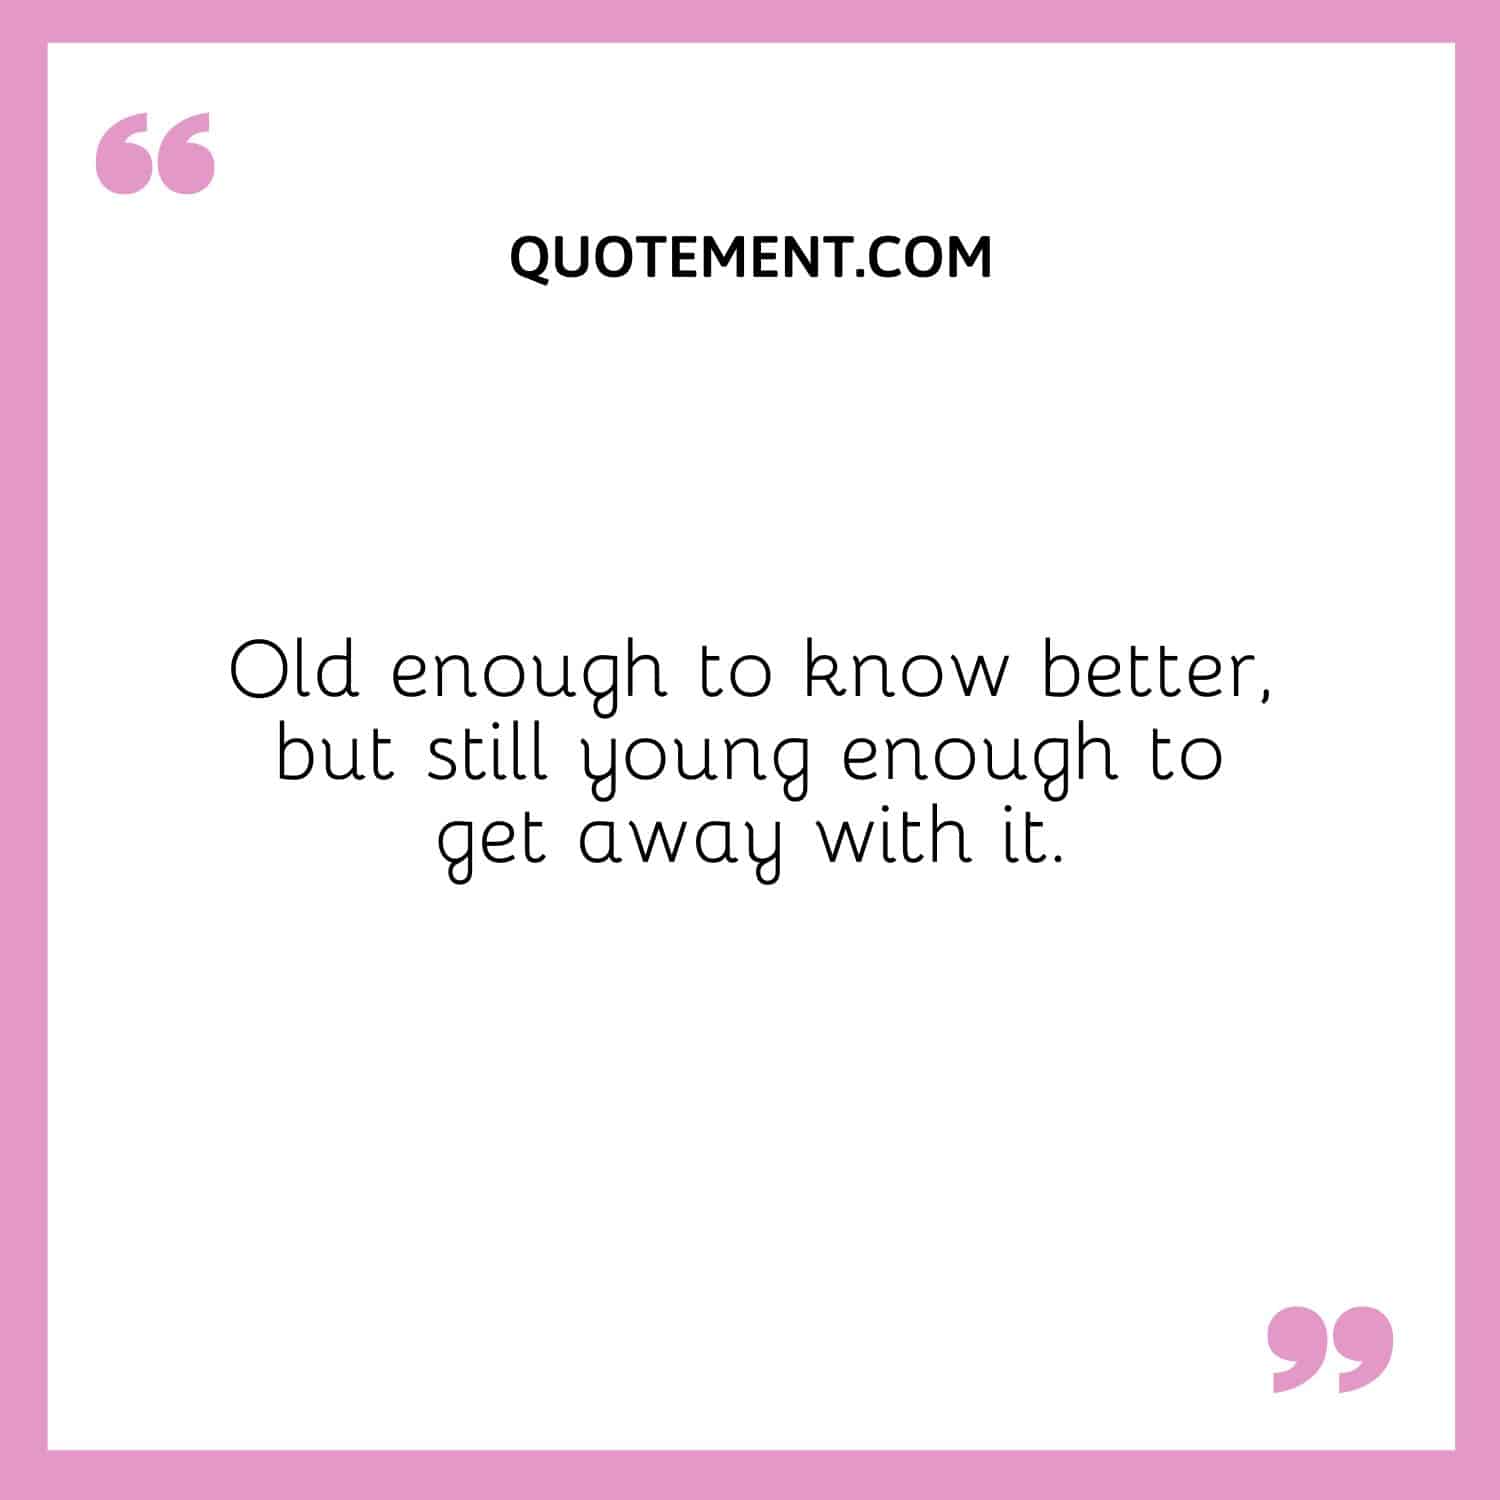 Old enough to know better, but still young enough to get away with it.